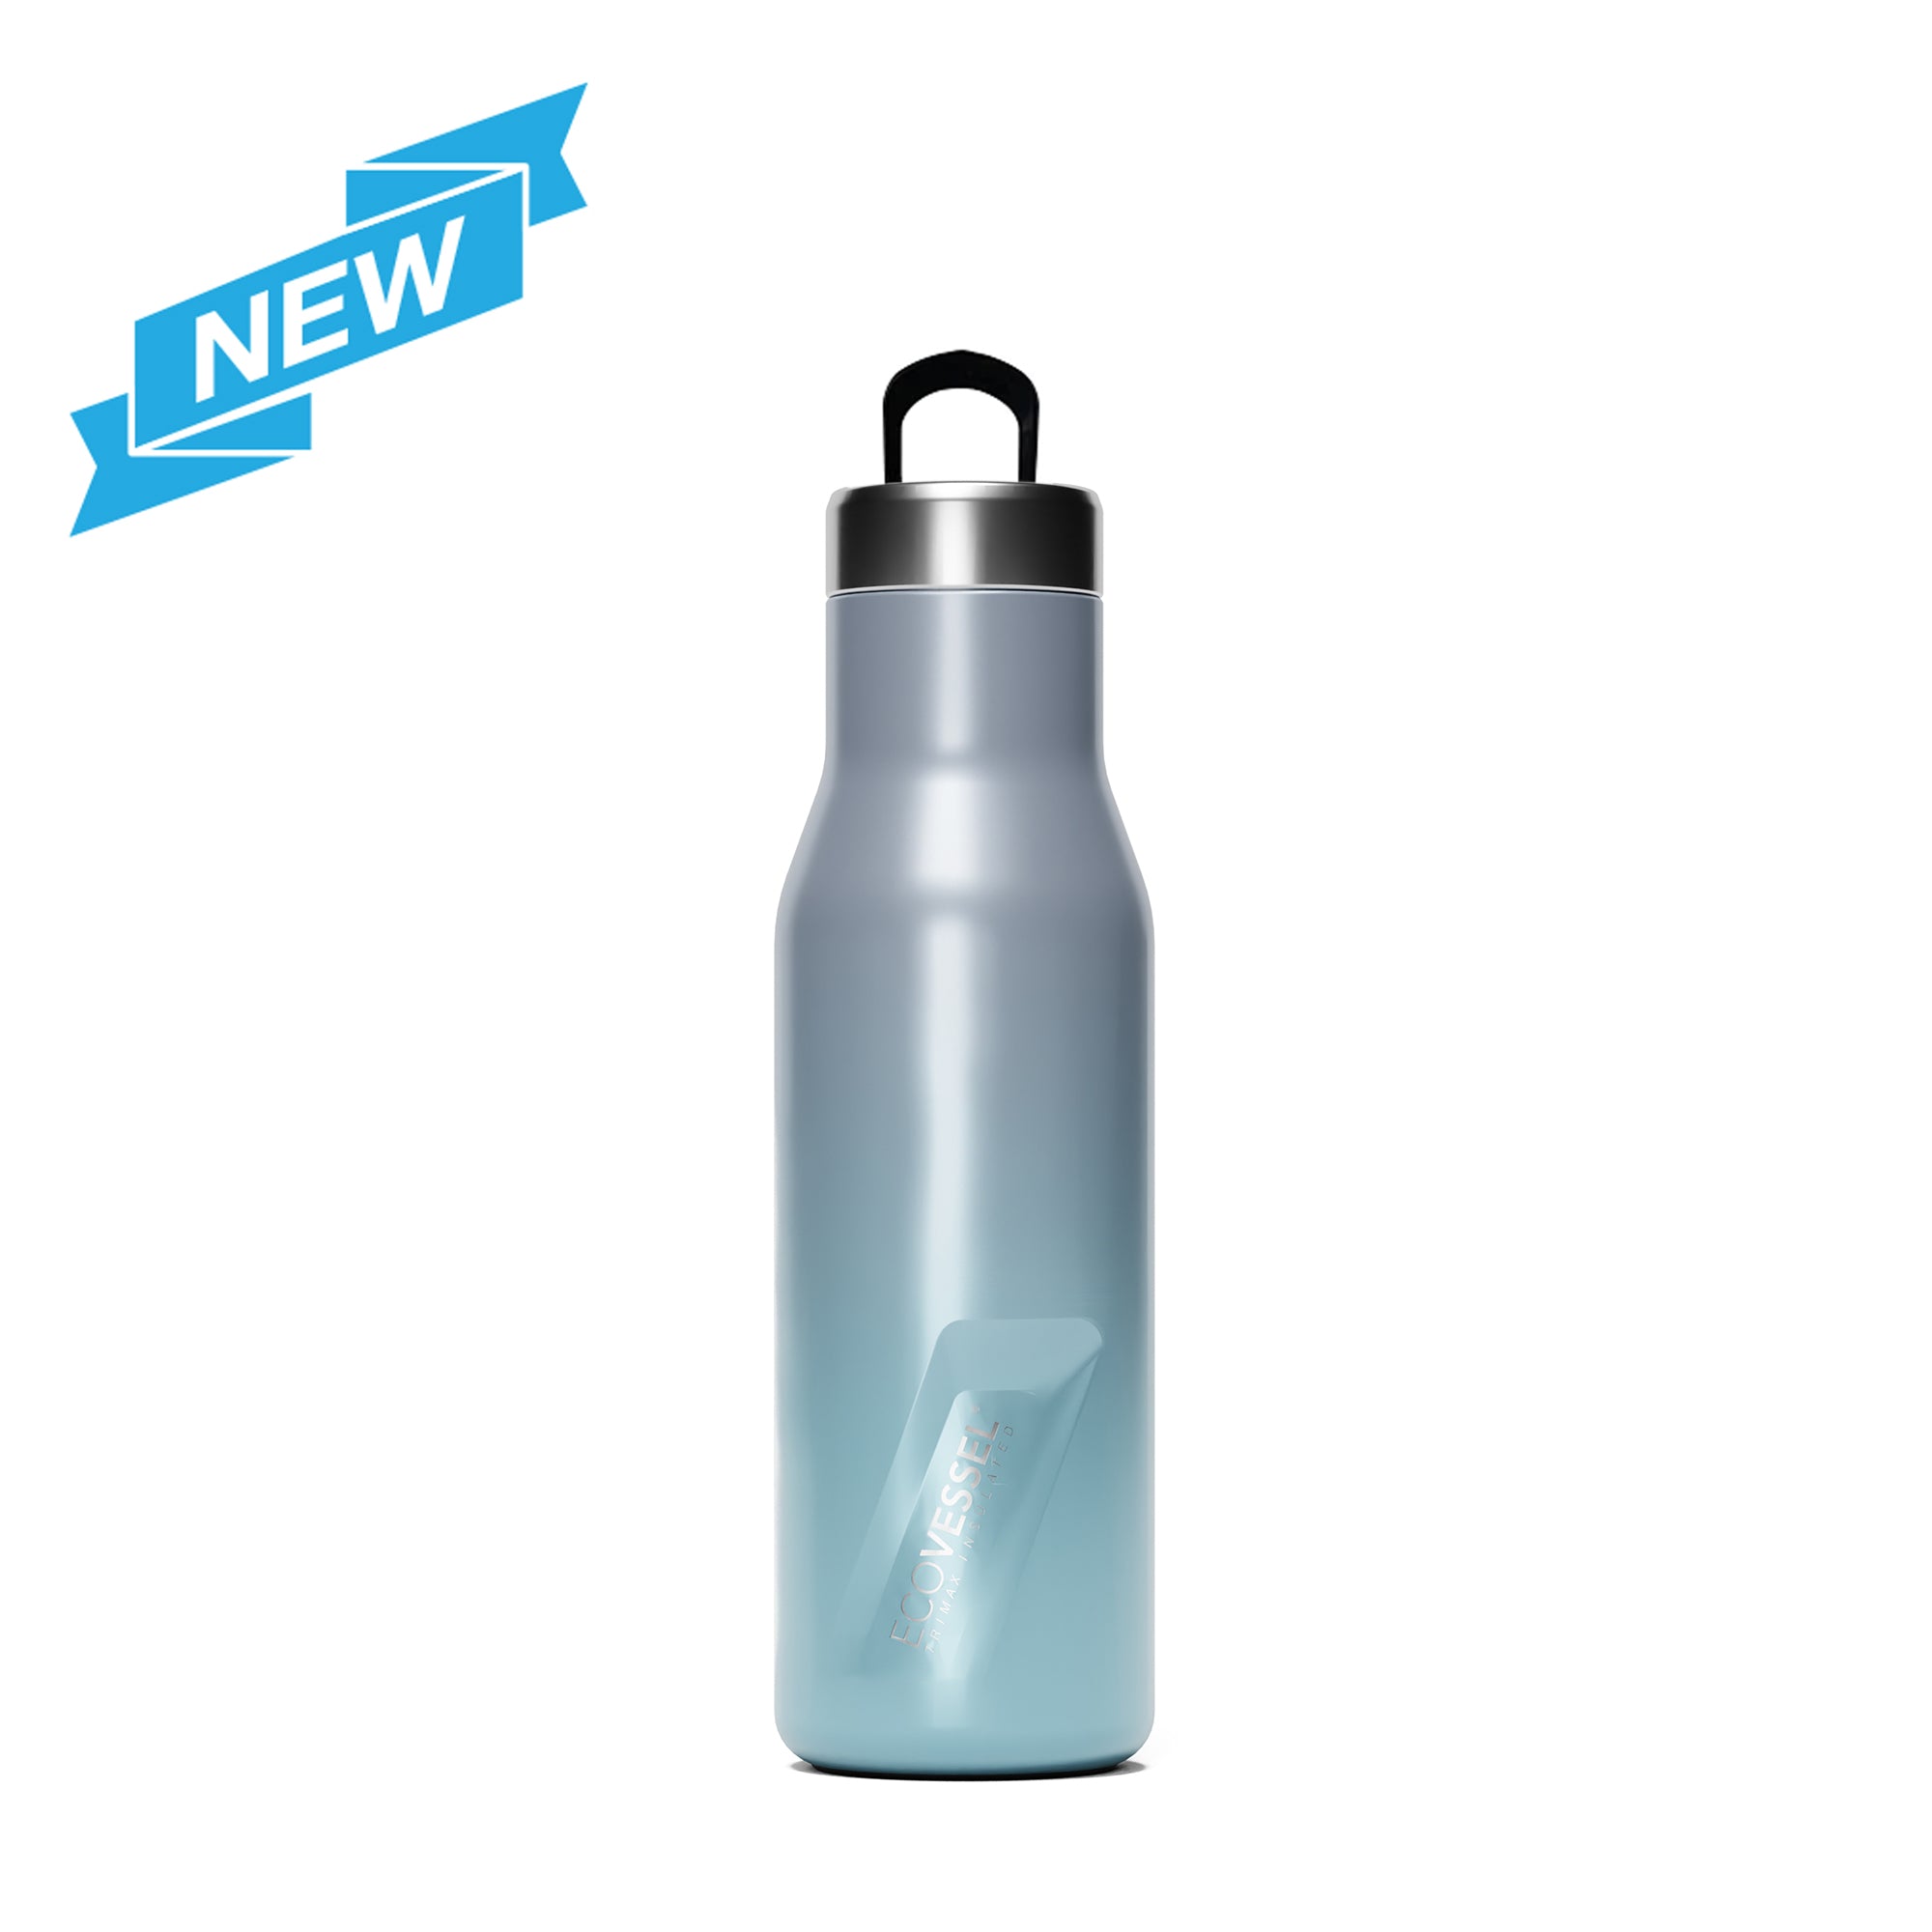 NEW! 2022 ASPEN - Insulated Stainless Steel Water & Wine Bottle with Hidden  Handle - 16oz